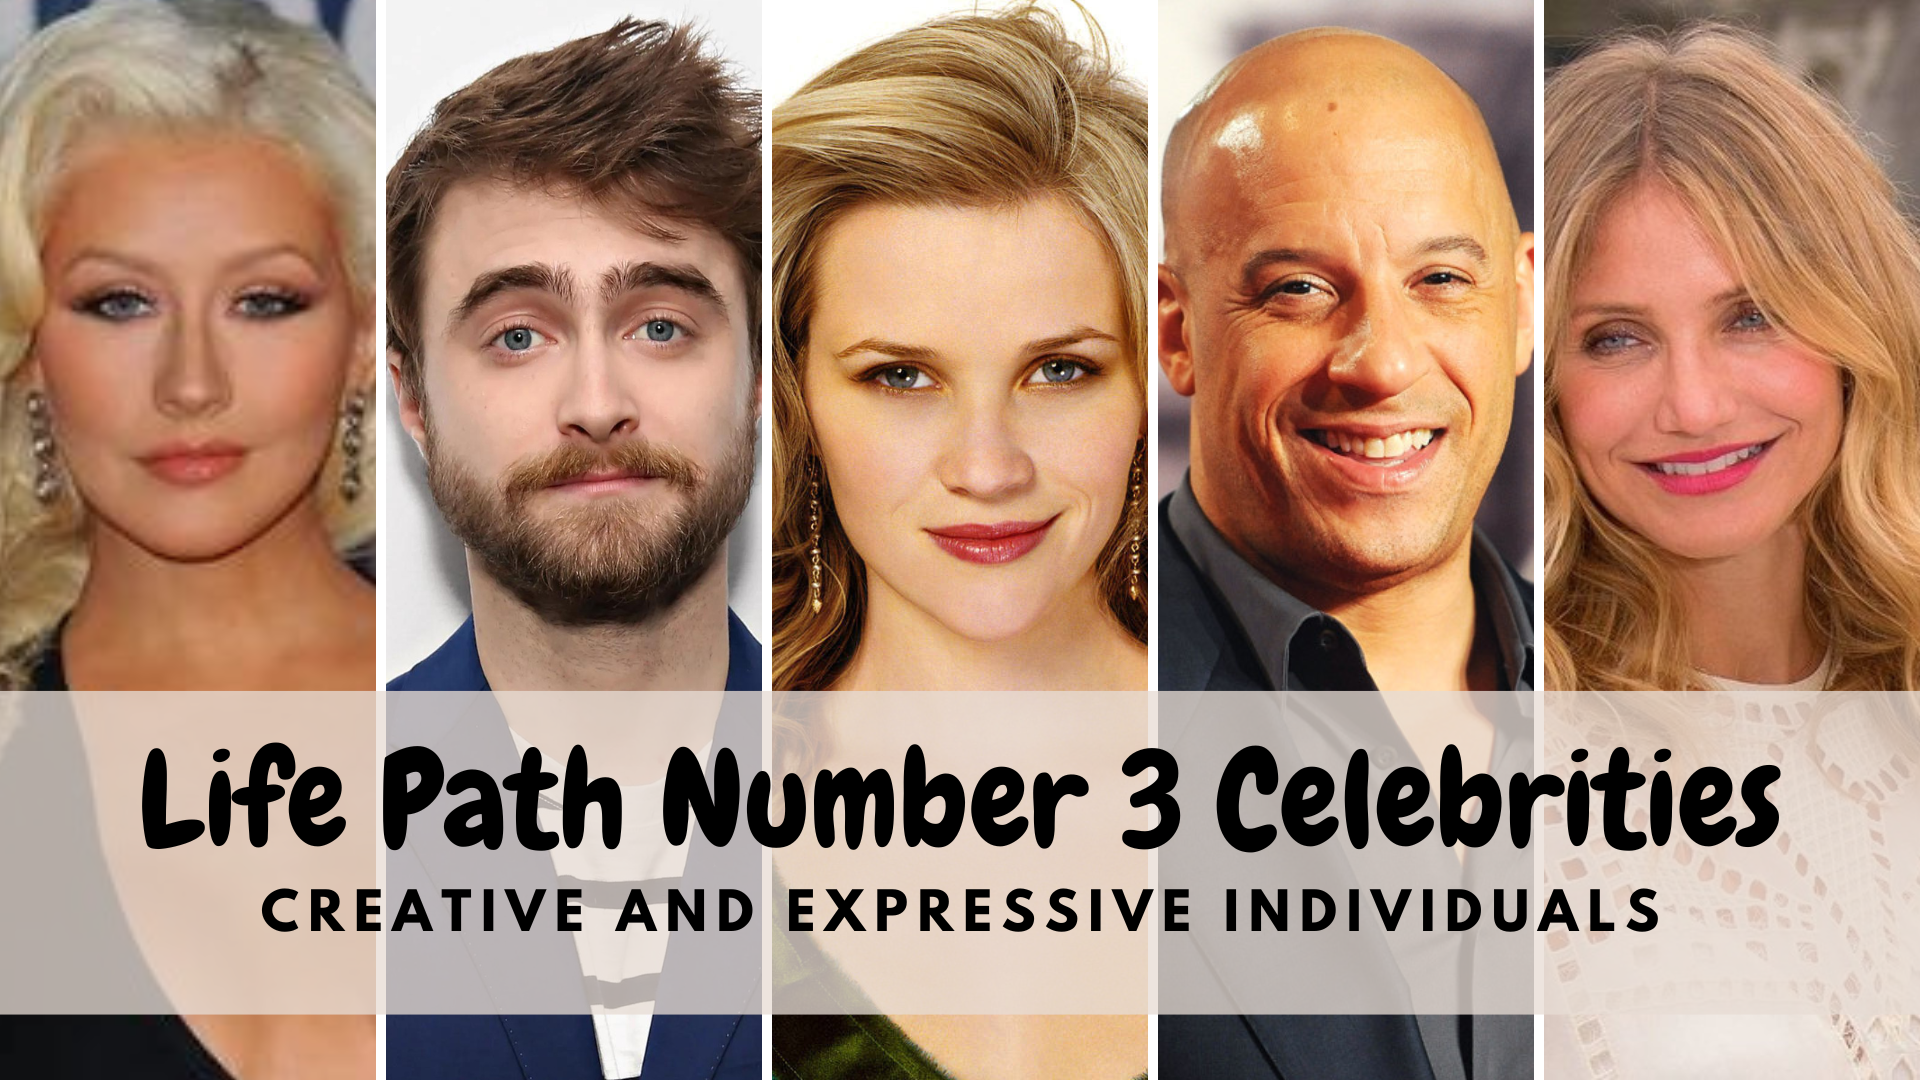 Life Path Number 3 Celebrities - Creative And Expressive Individuals